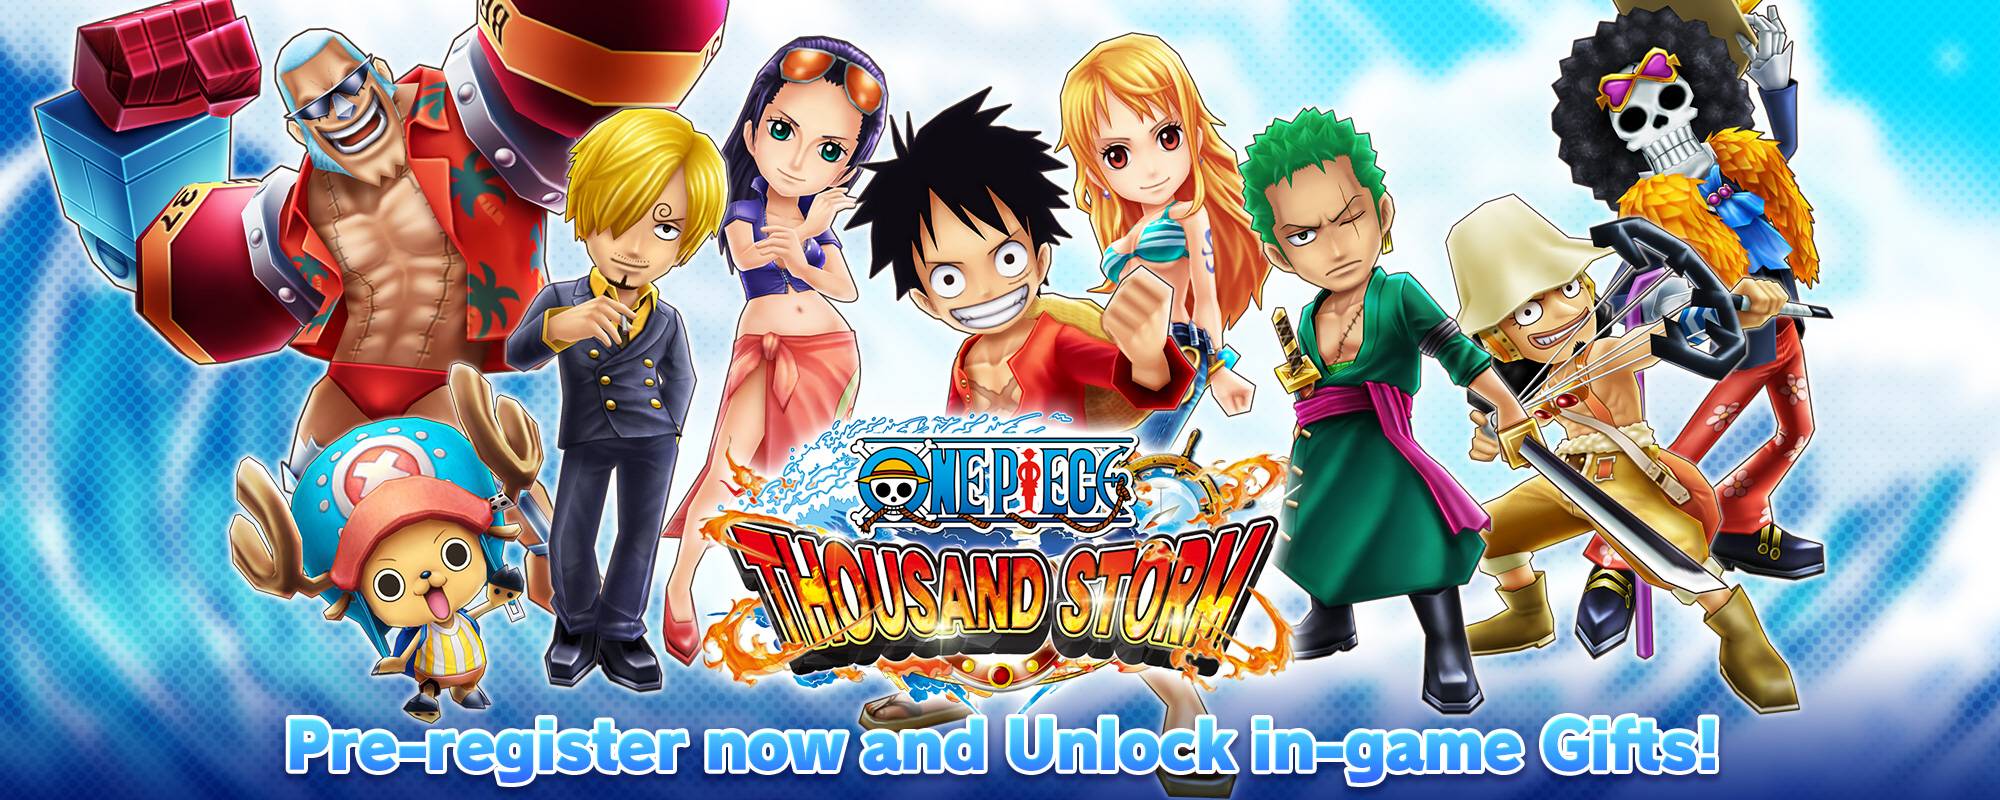 One Piece Thousand Storm Game By Bandai Namco Now Open For Pre Registration Android Community